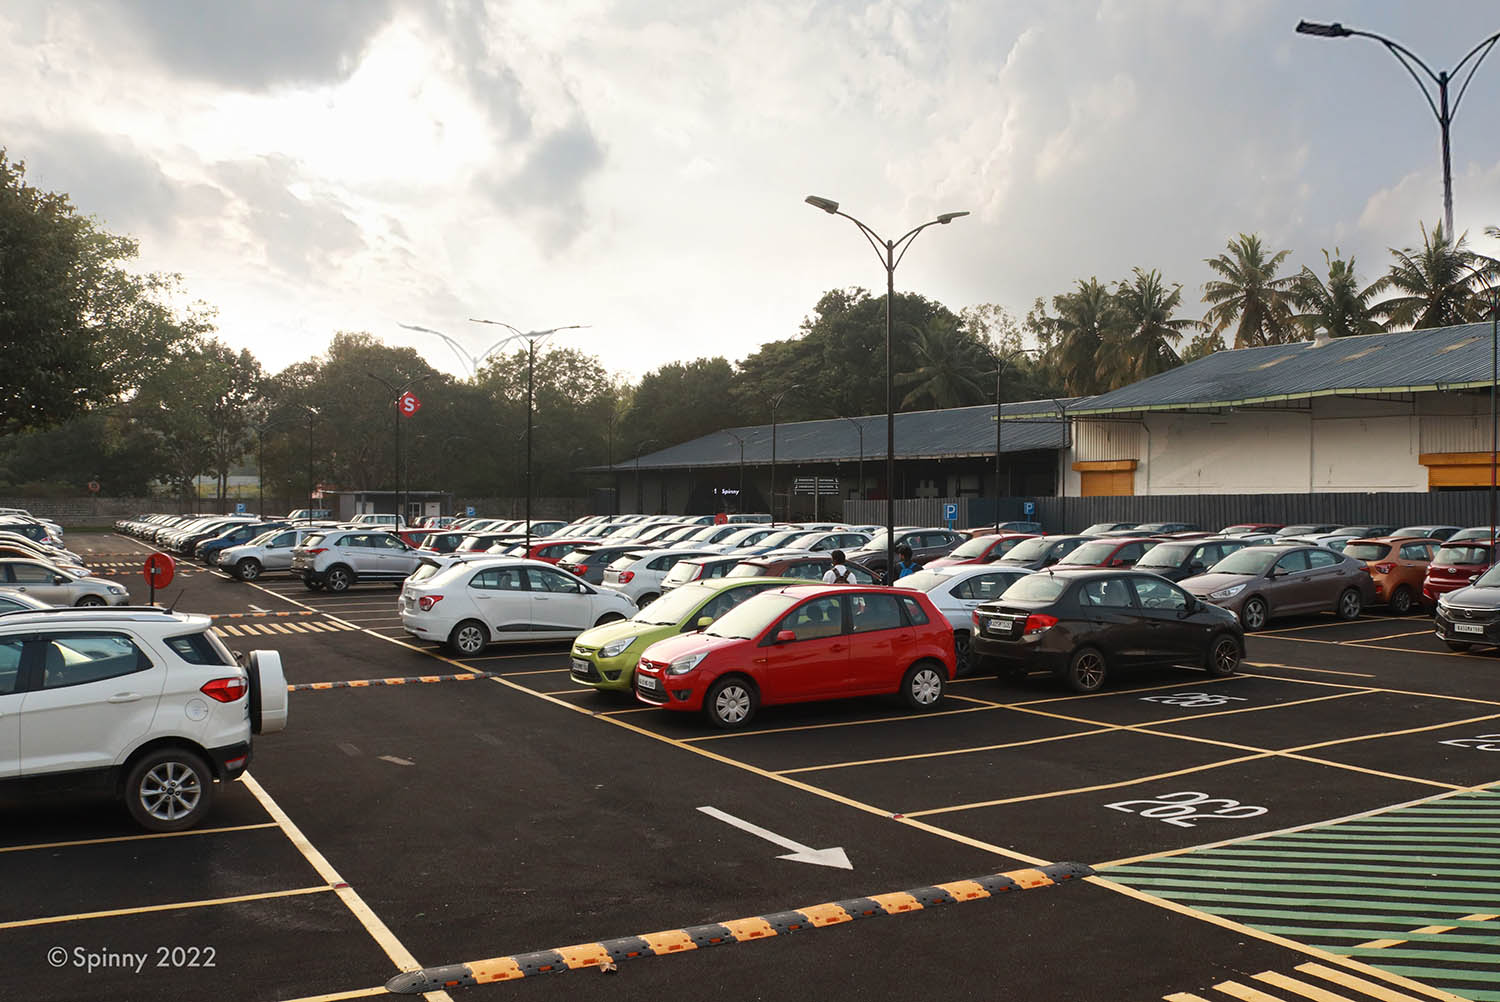 Spinny Park Opens In Bengaluru To Display Pre-Owned Cars (1)